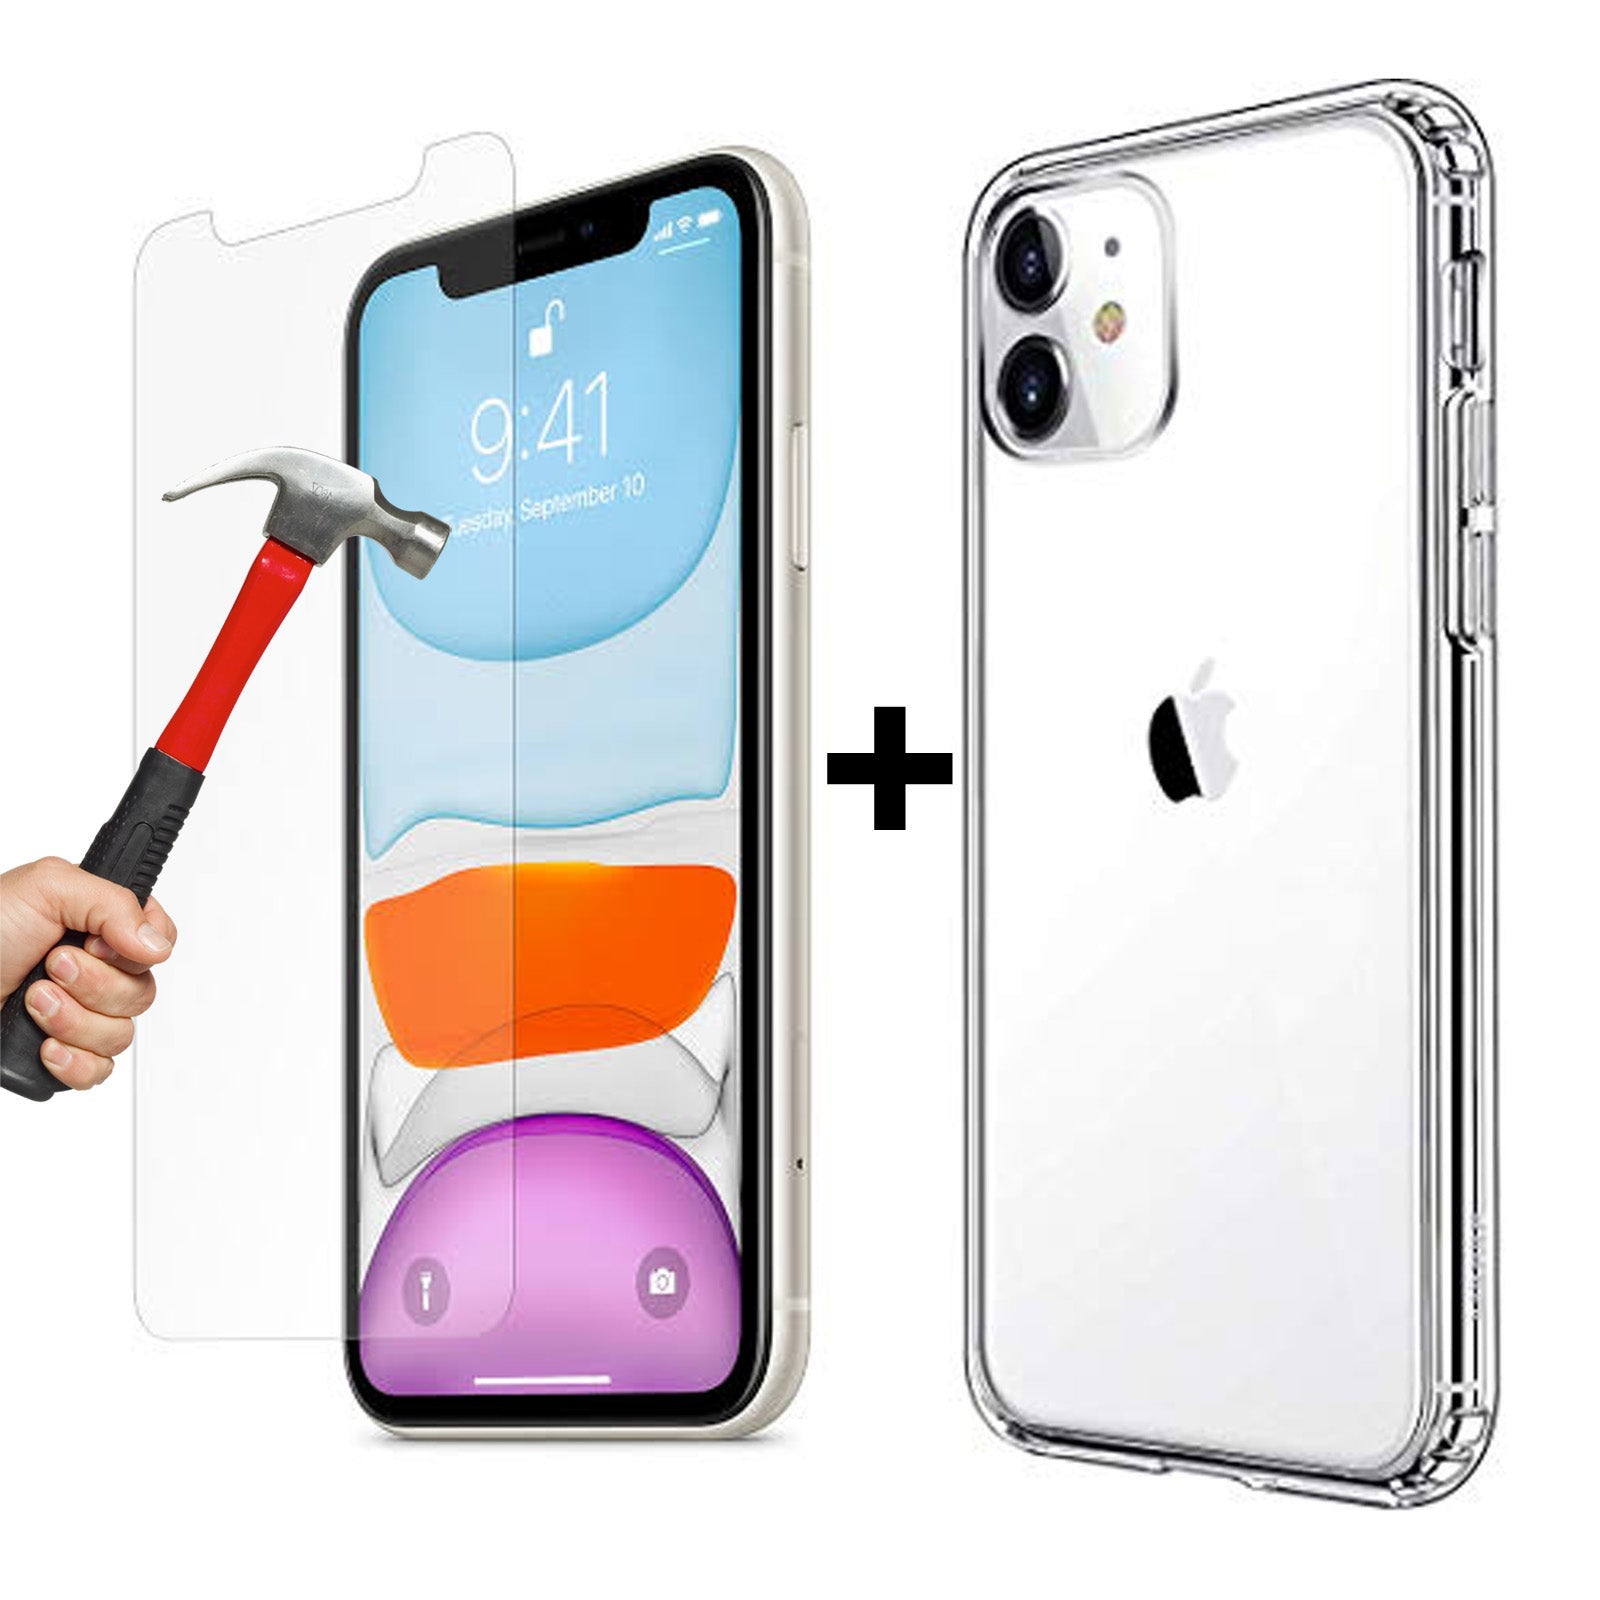 Apple iPhone 11 clear case cover and 9H Tempered Glass front screen protector